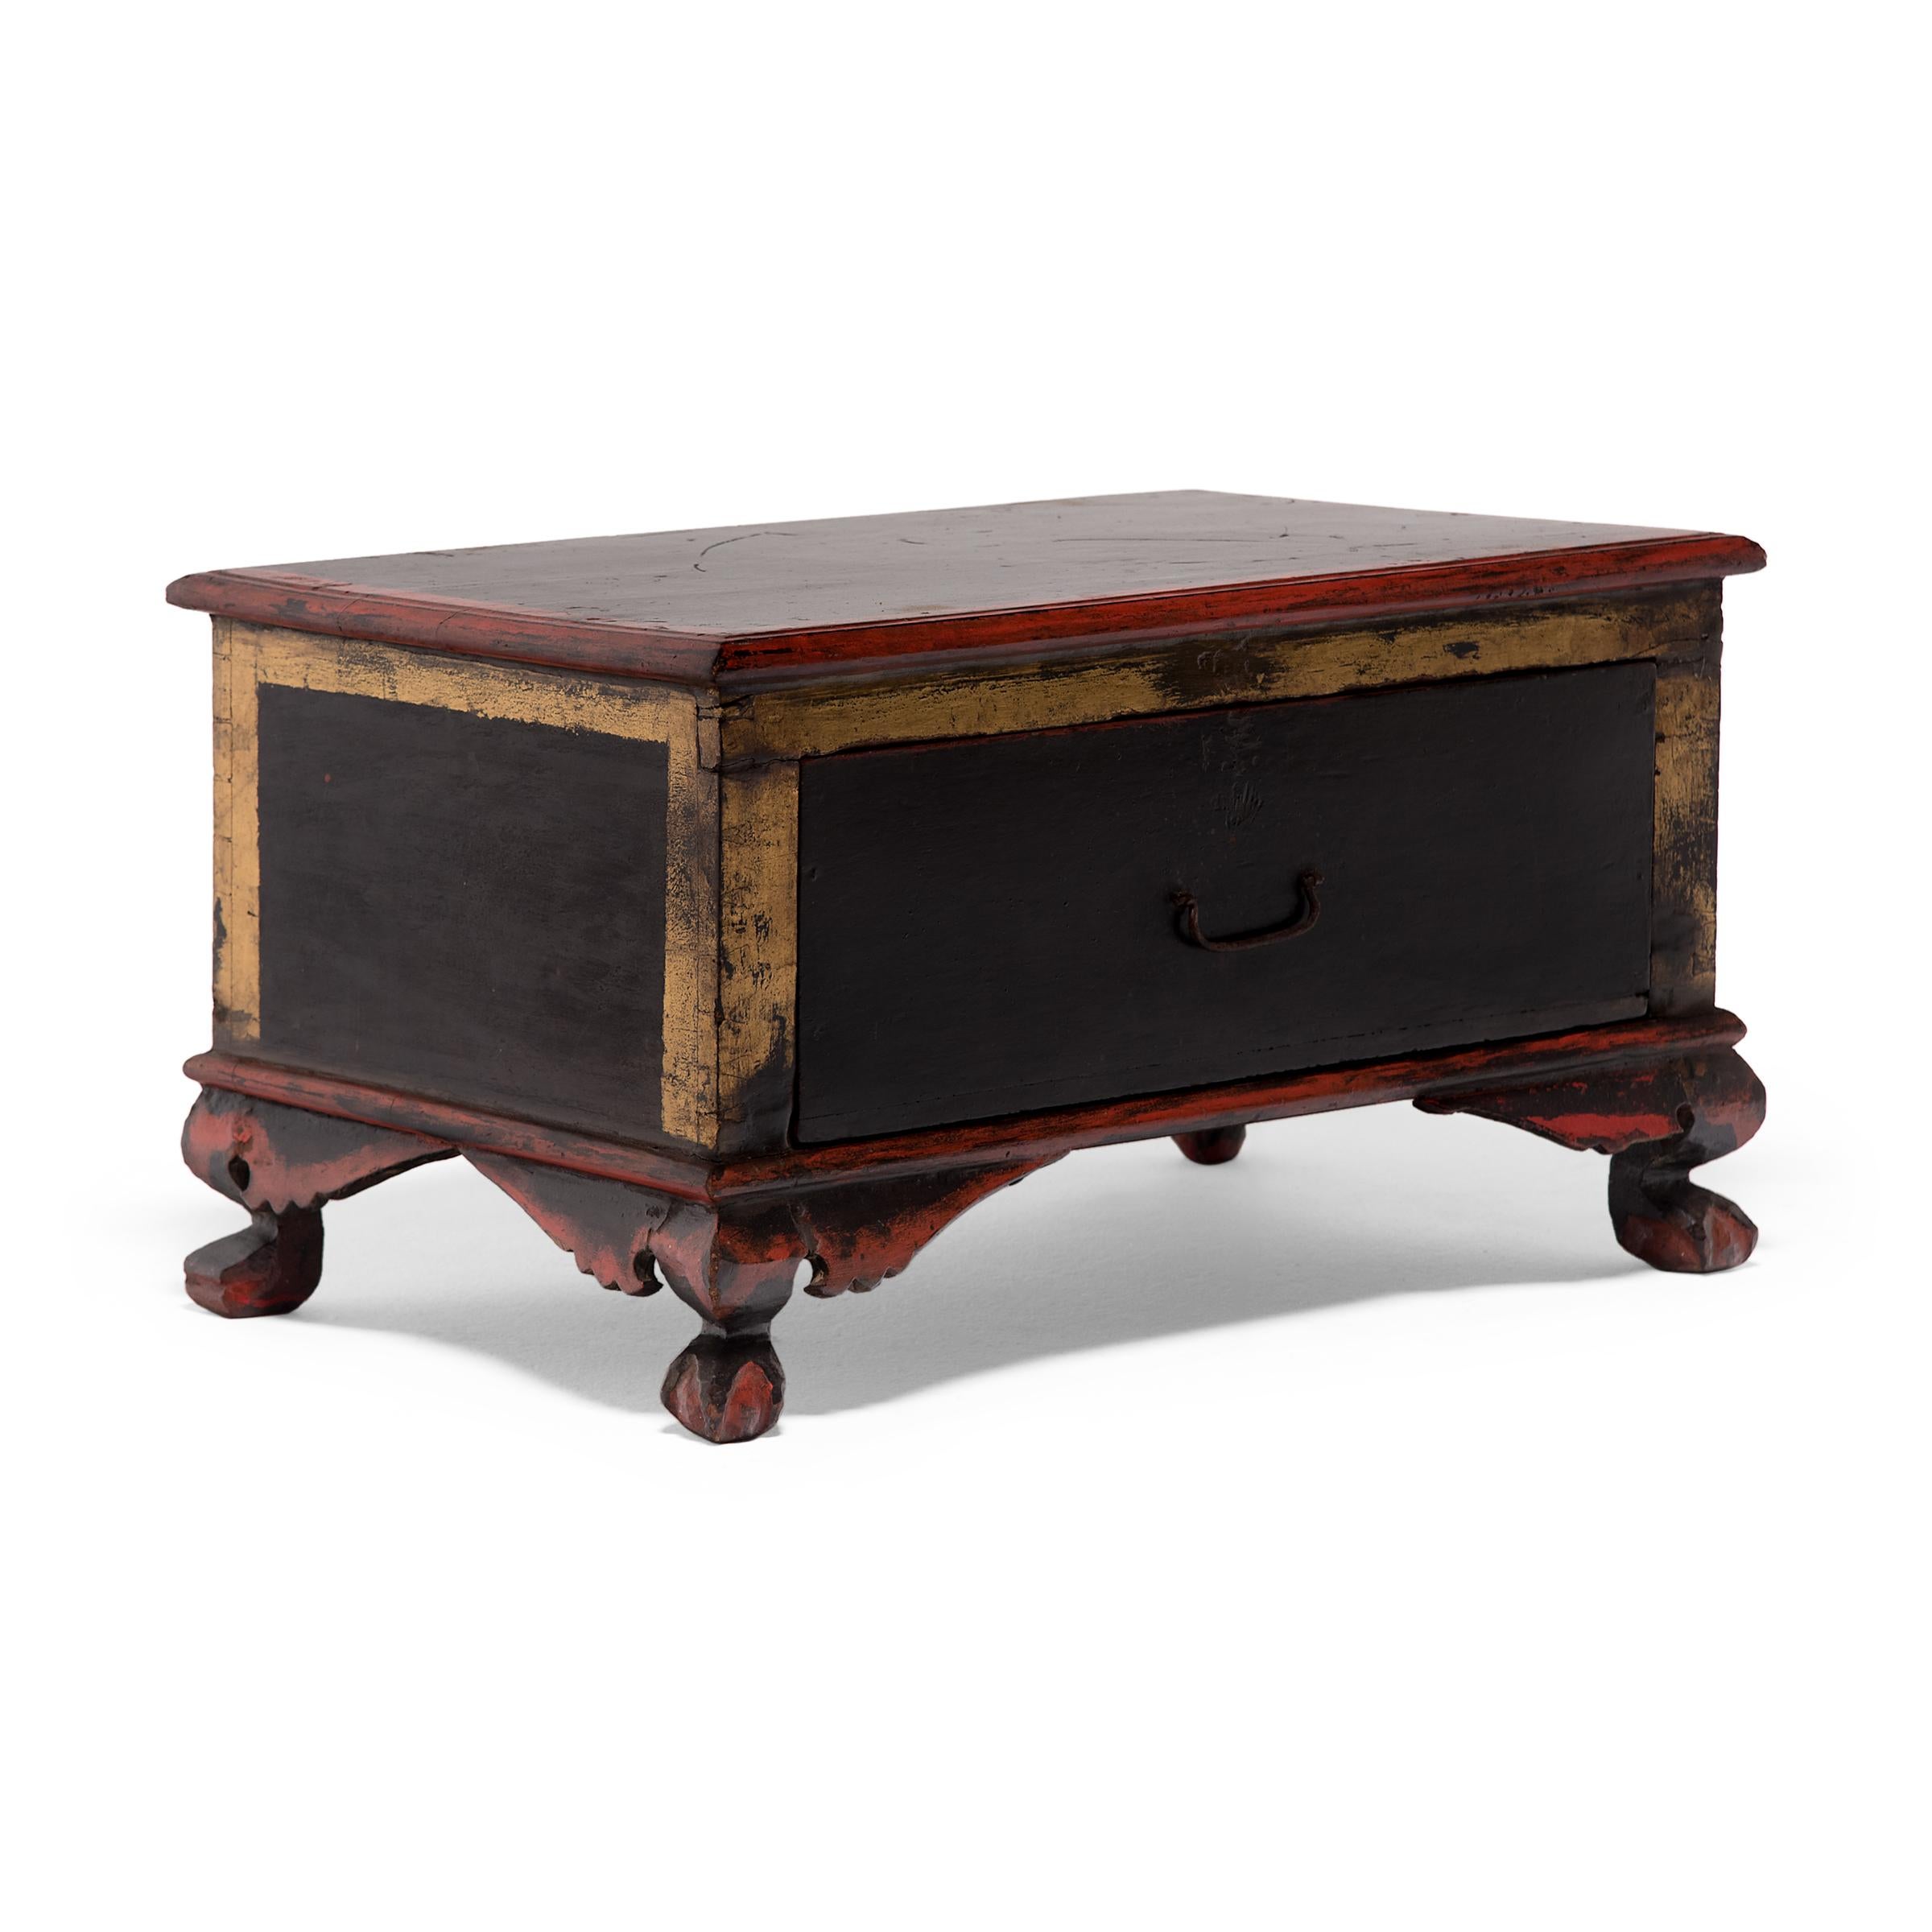 Coat upon coat of red, black and yellow lacquer was hand-applied to this 19th-century footed trunk likely originated as a display stand and storage chest in an elaborate shrine display. Placed to the side of the altar, the chest may have held